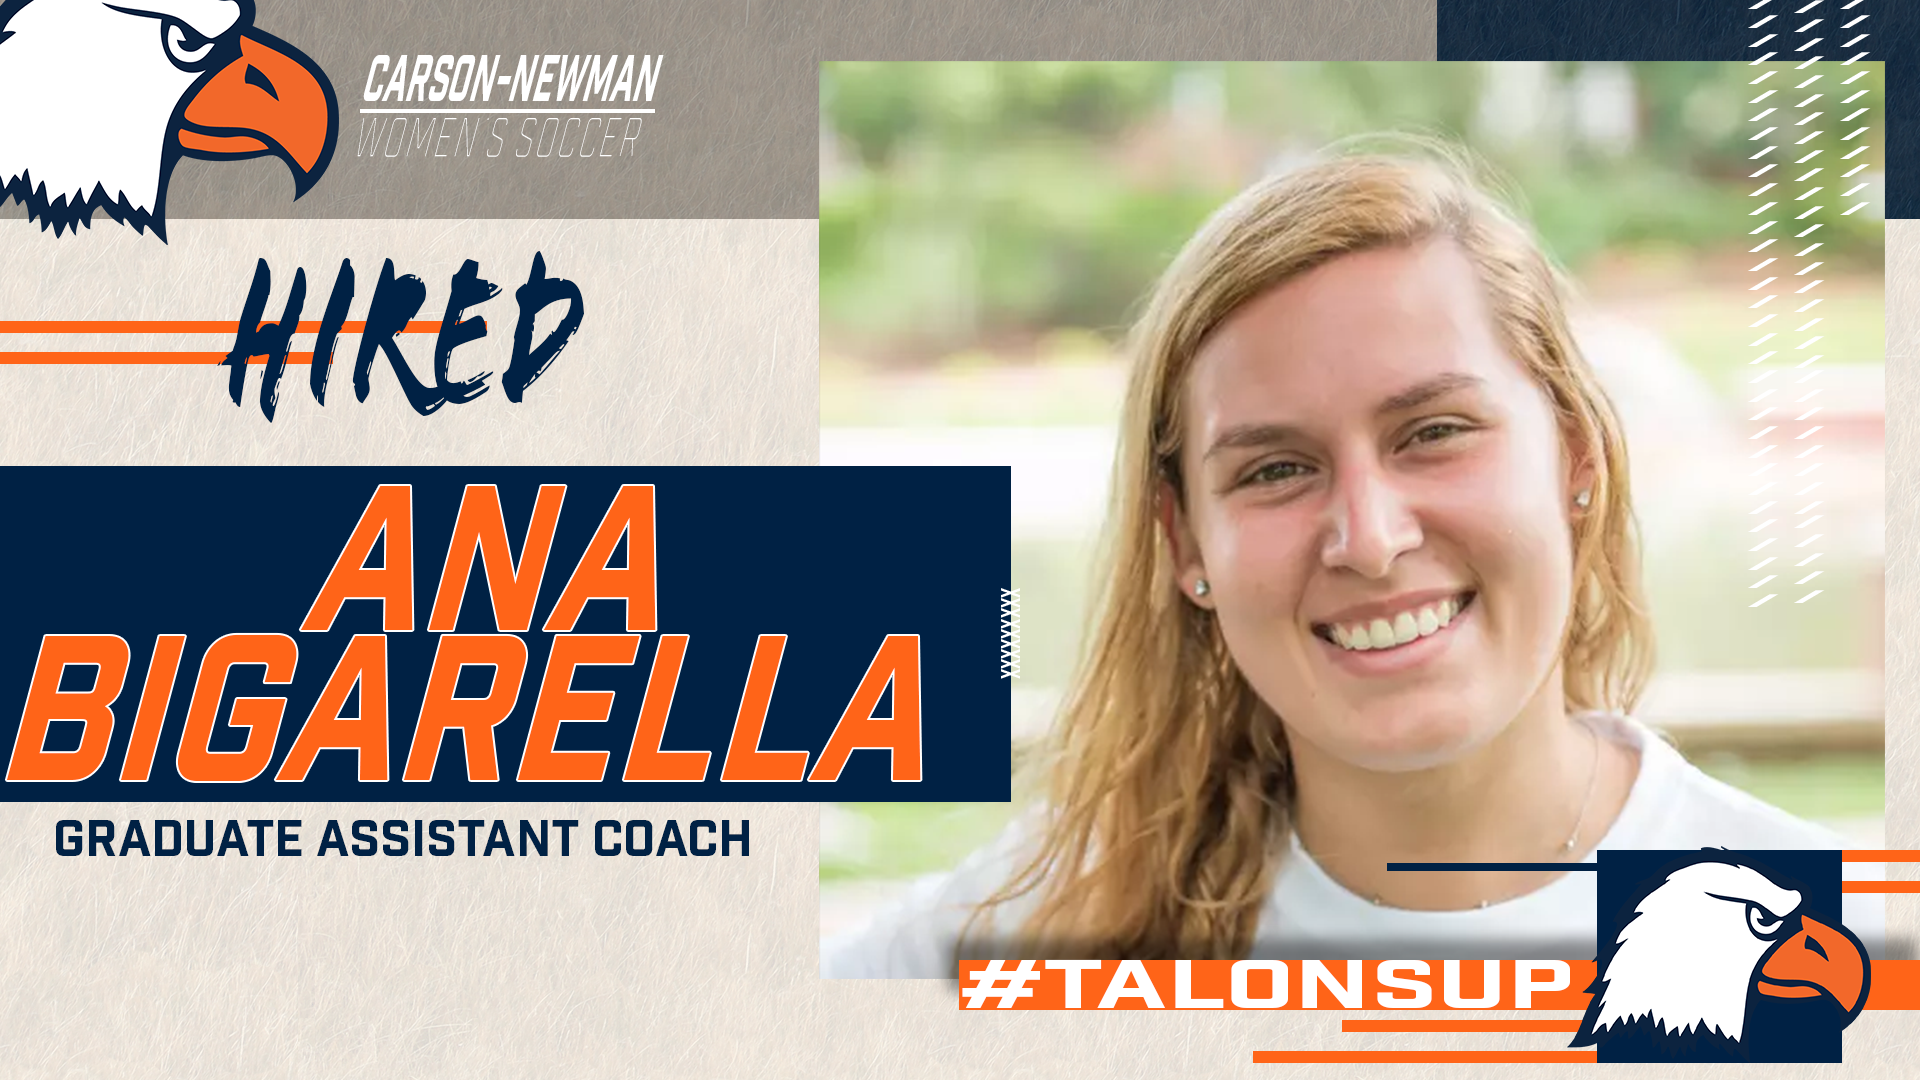 Bigarella joins women's soccer staff as graduate assistant